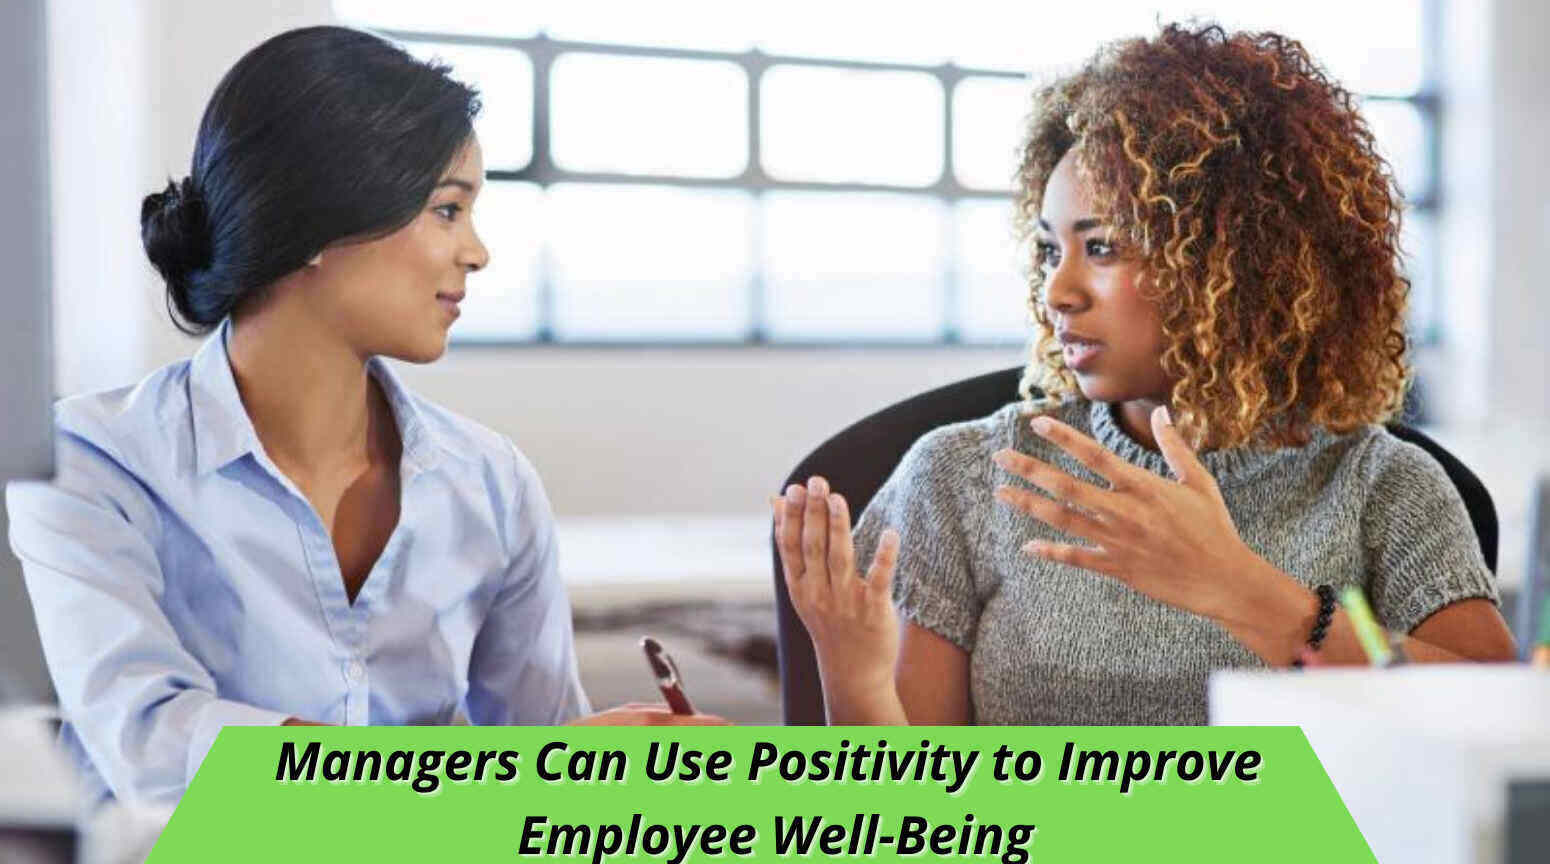 Managers Can Improve Employee Well-Being